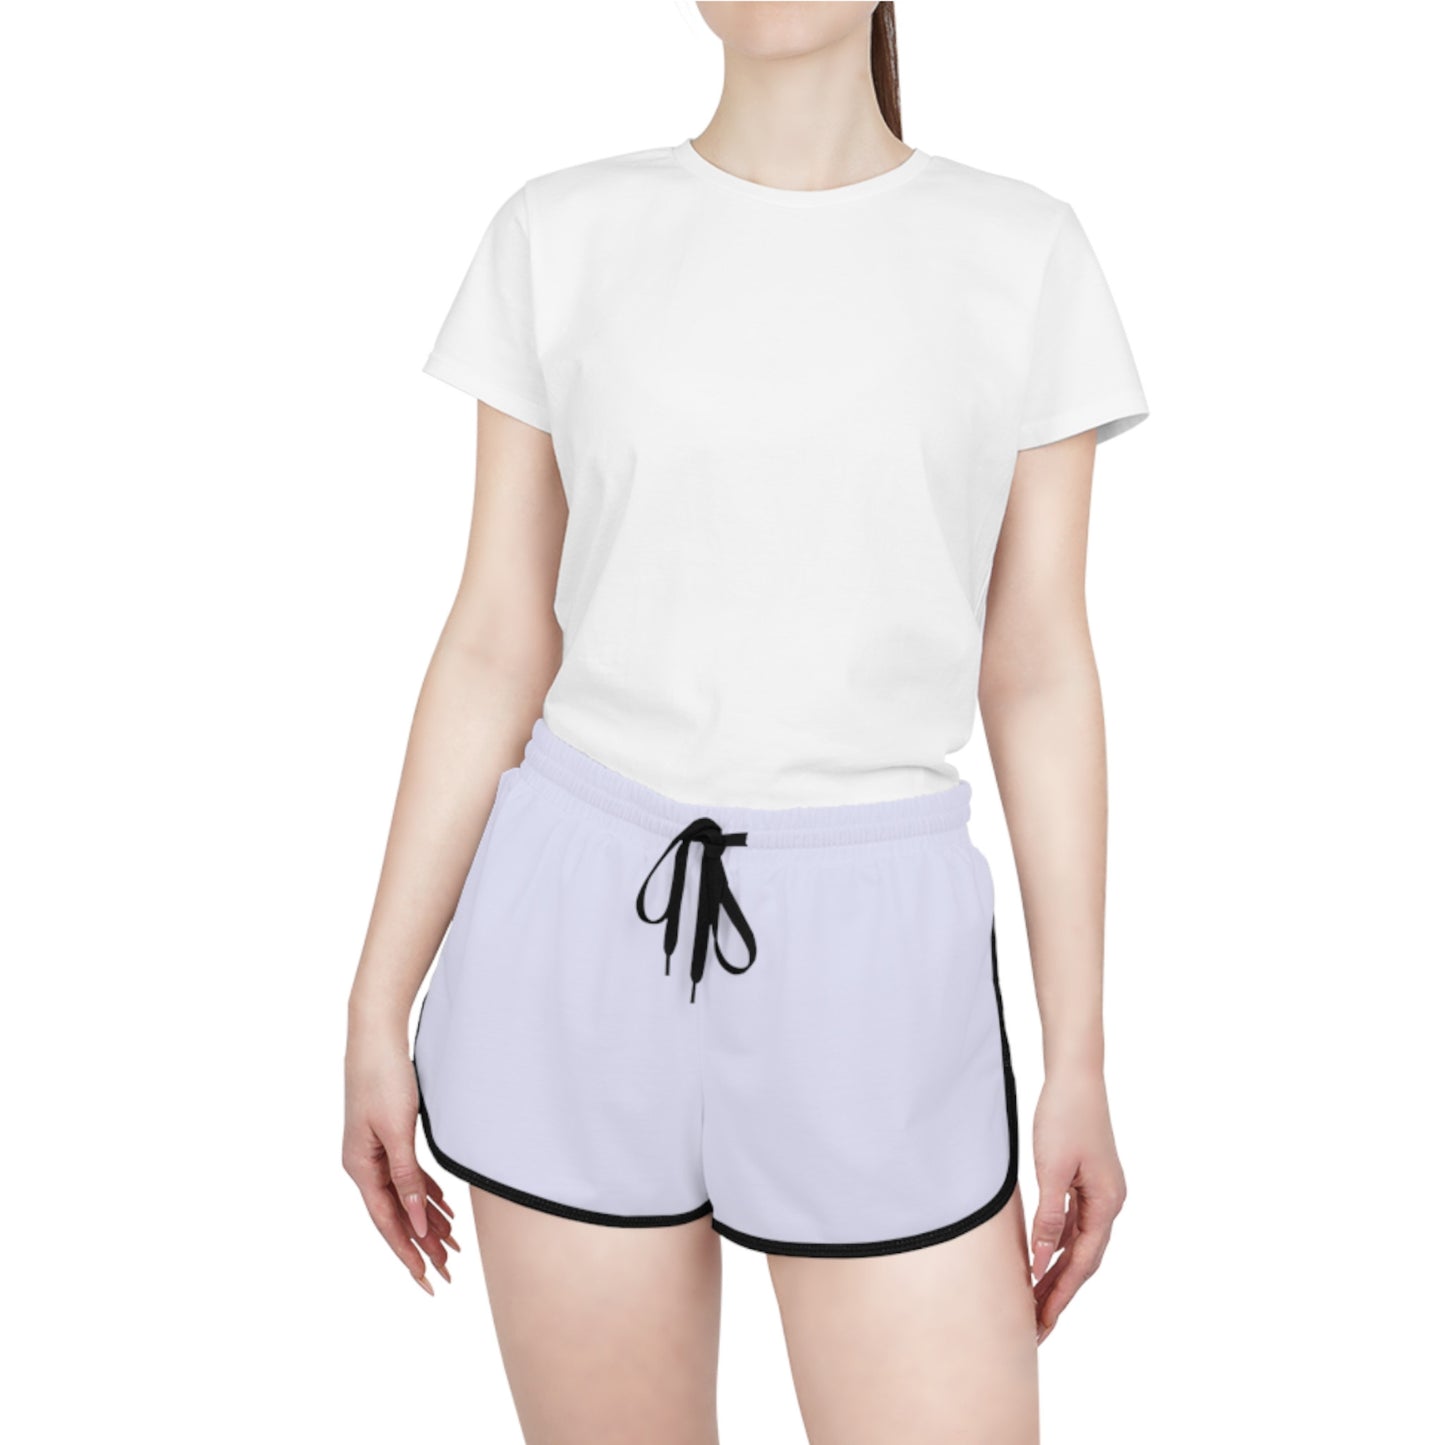 Lavender Women's Relaxed Shorts